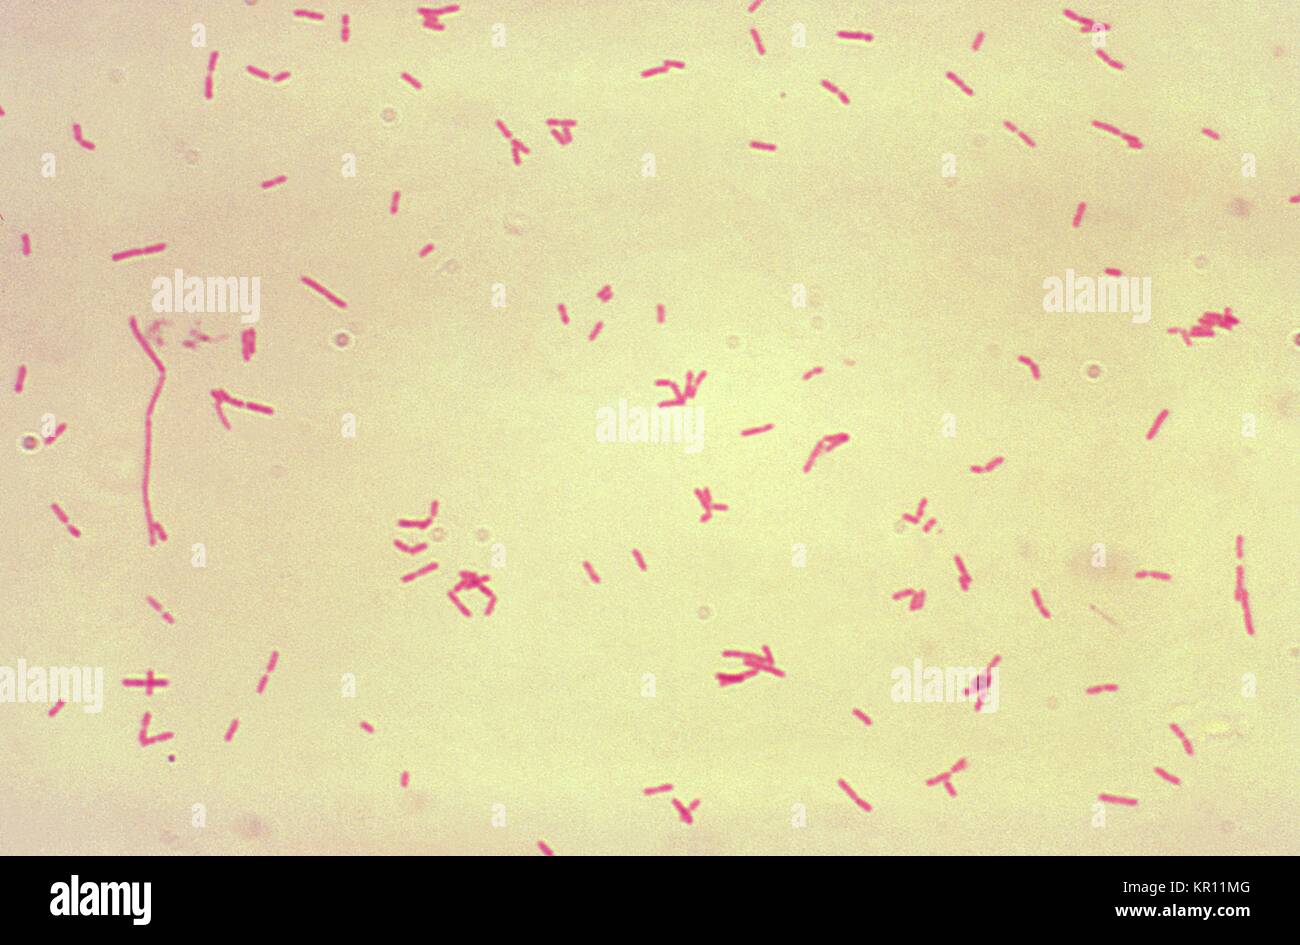 Magnified 1000X, this micrograph depicts Bacteroides fragilis subsp, 1974. fragilis bacteria that had been grown in Schaedler?s broth, and processed using the Gram-stain method. Bacteroides fragilis, a Gram-negative rod, constitutes 1-2% of the normal colonic bacterial microflora in humans. It is associated with extraintestinal infections such as abscesses and soft tissue infections, as well as diarrheal diseases. Image courtesy CDC/Don Stalons. Stock Photo